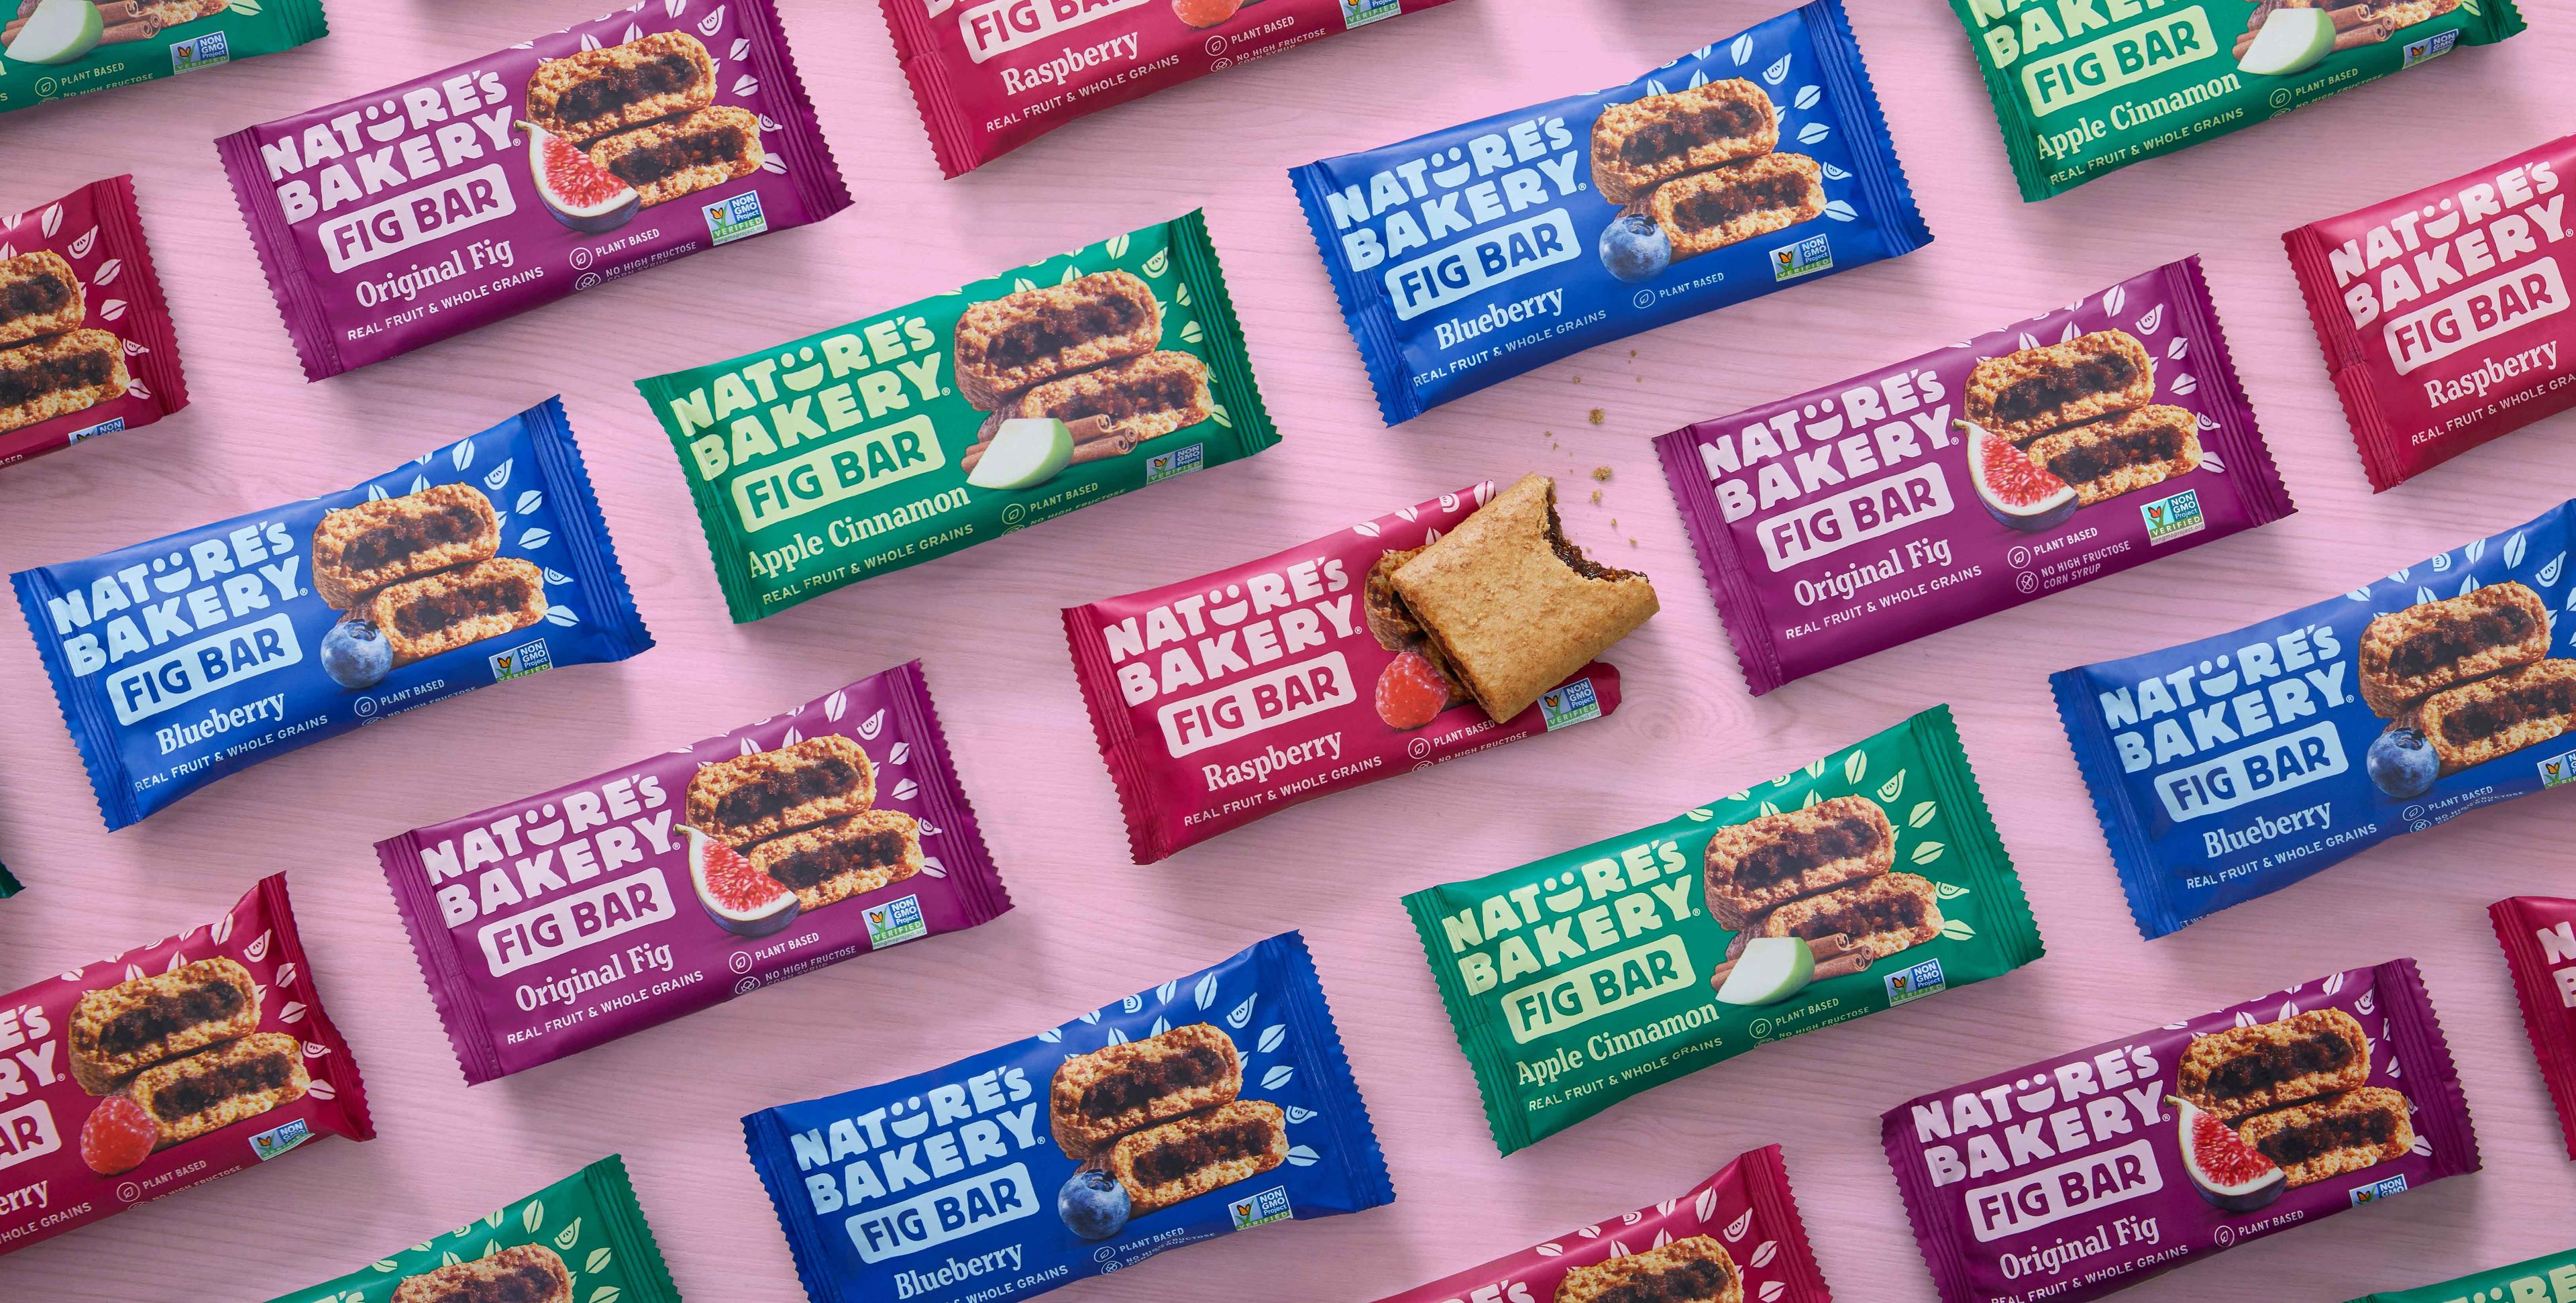 An assortment of Nature's Bakery fig bars on a pink background